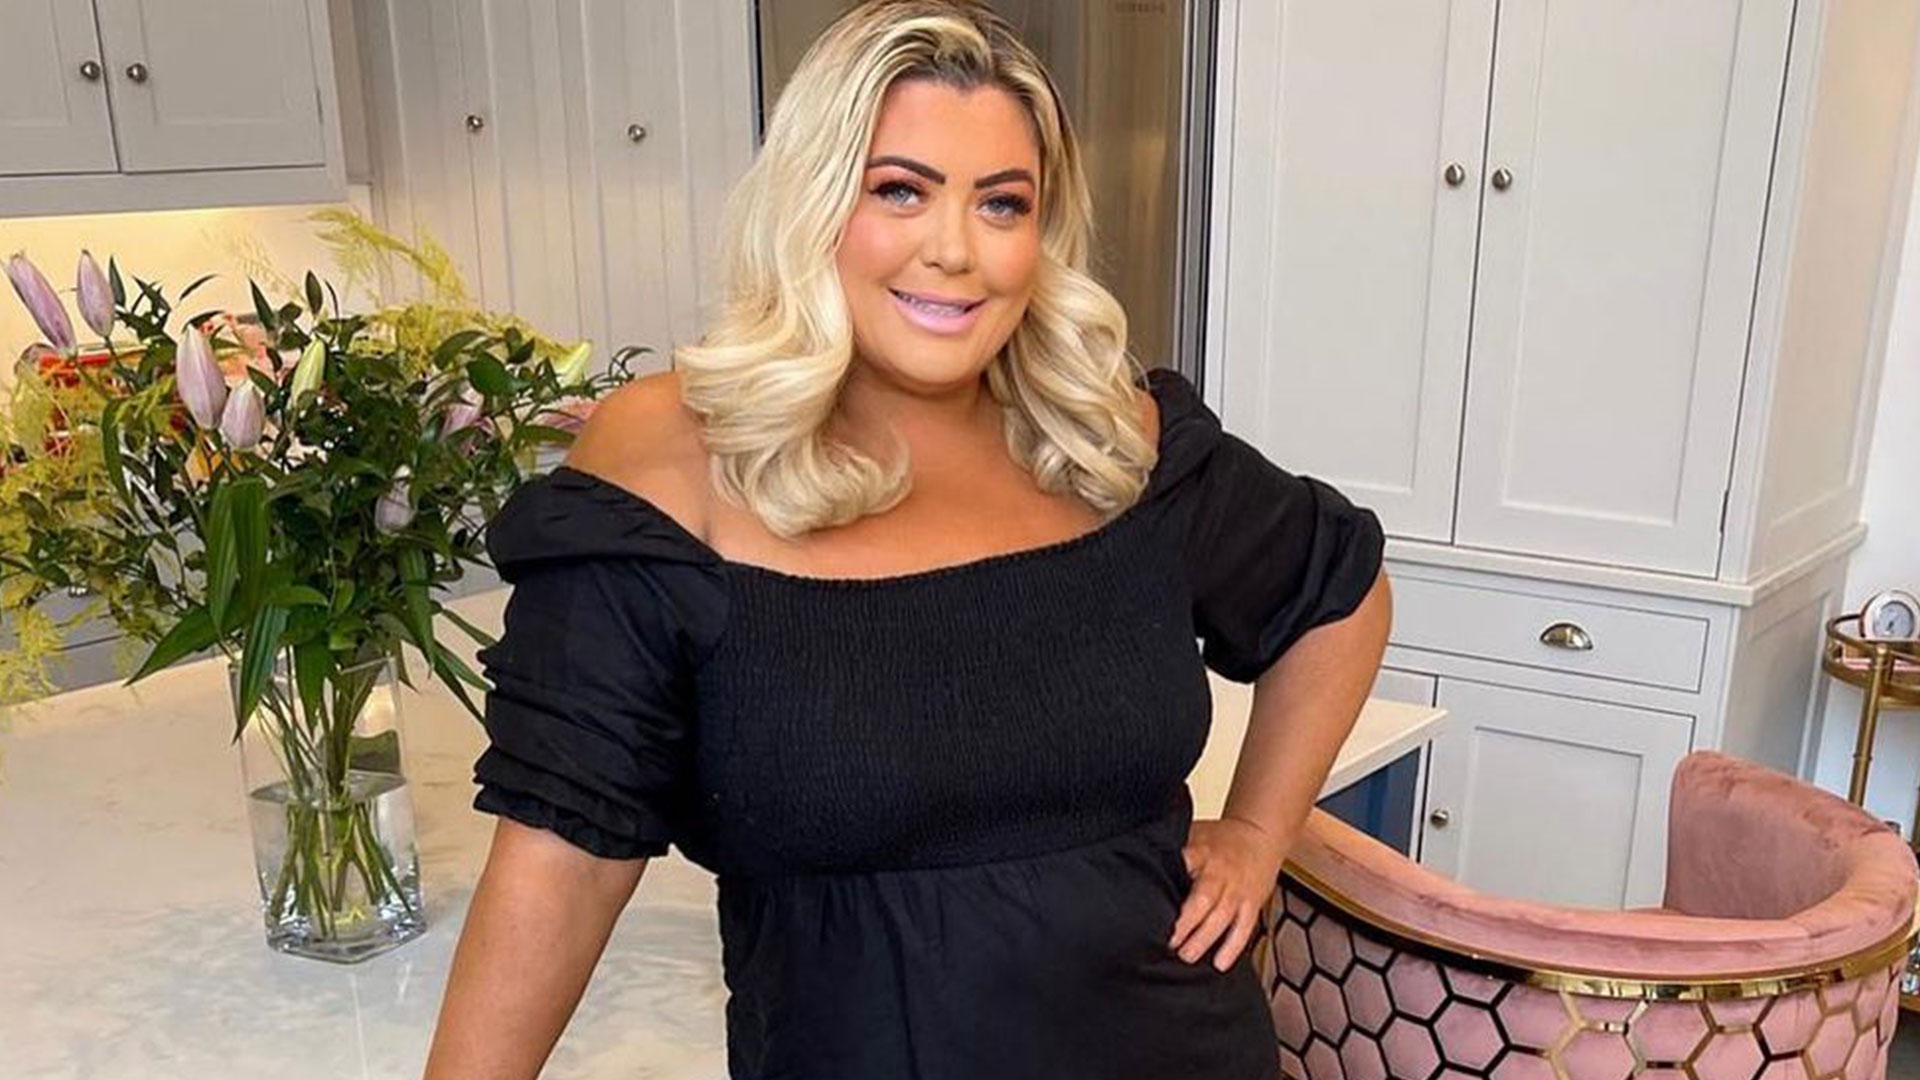 Gemma Collins reveals her secret struggle with PTSD after almost losing Essex home to her father ‘was dying’